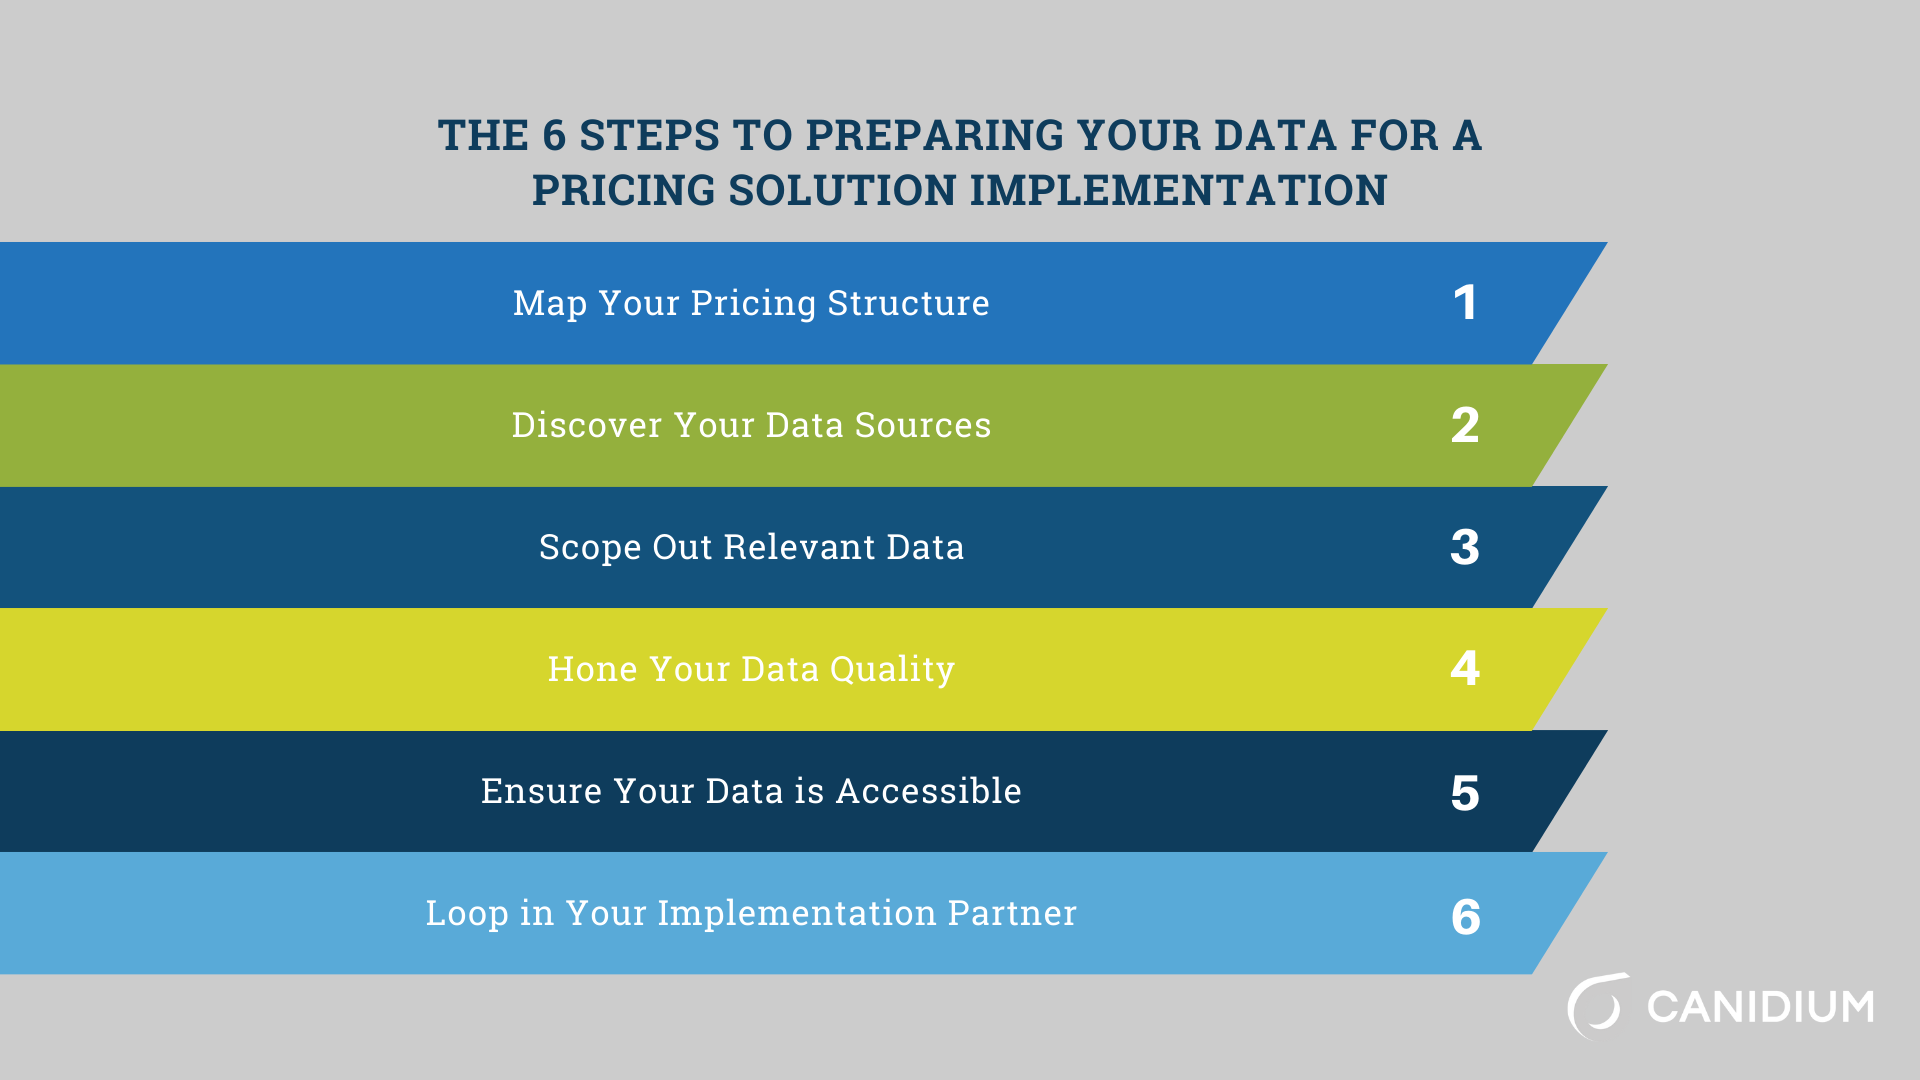 6 steps to preparing your data for a pricing solution implementation